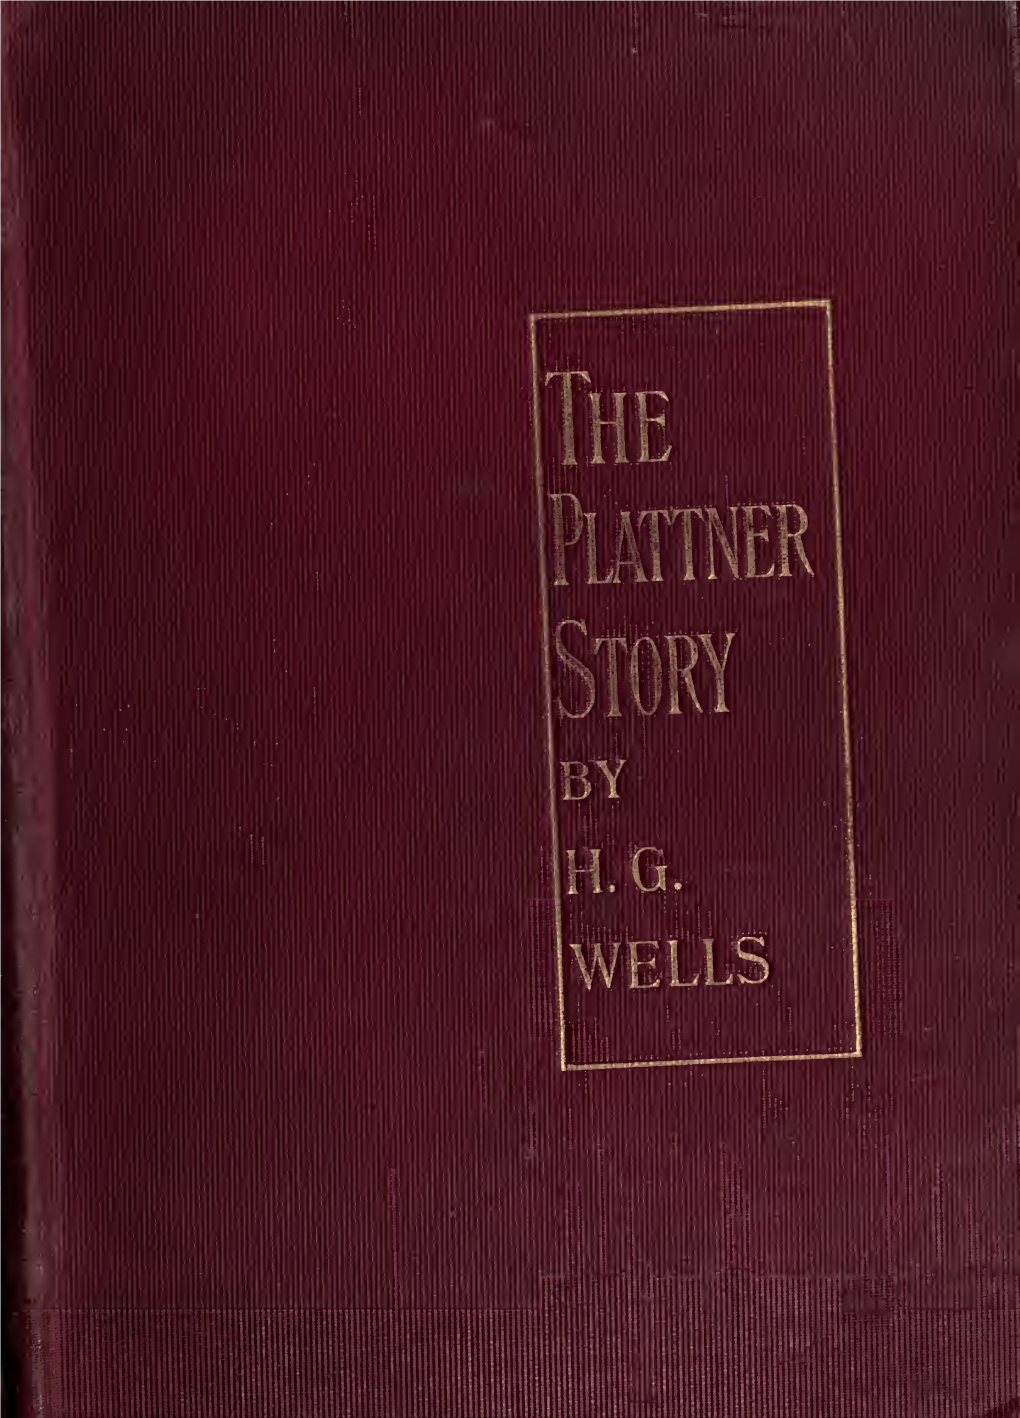 The Plattner Story and Others by the Same Author